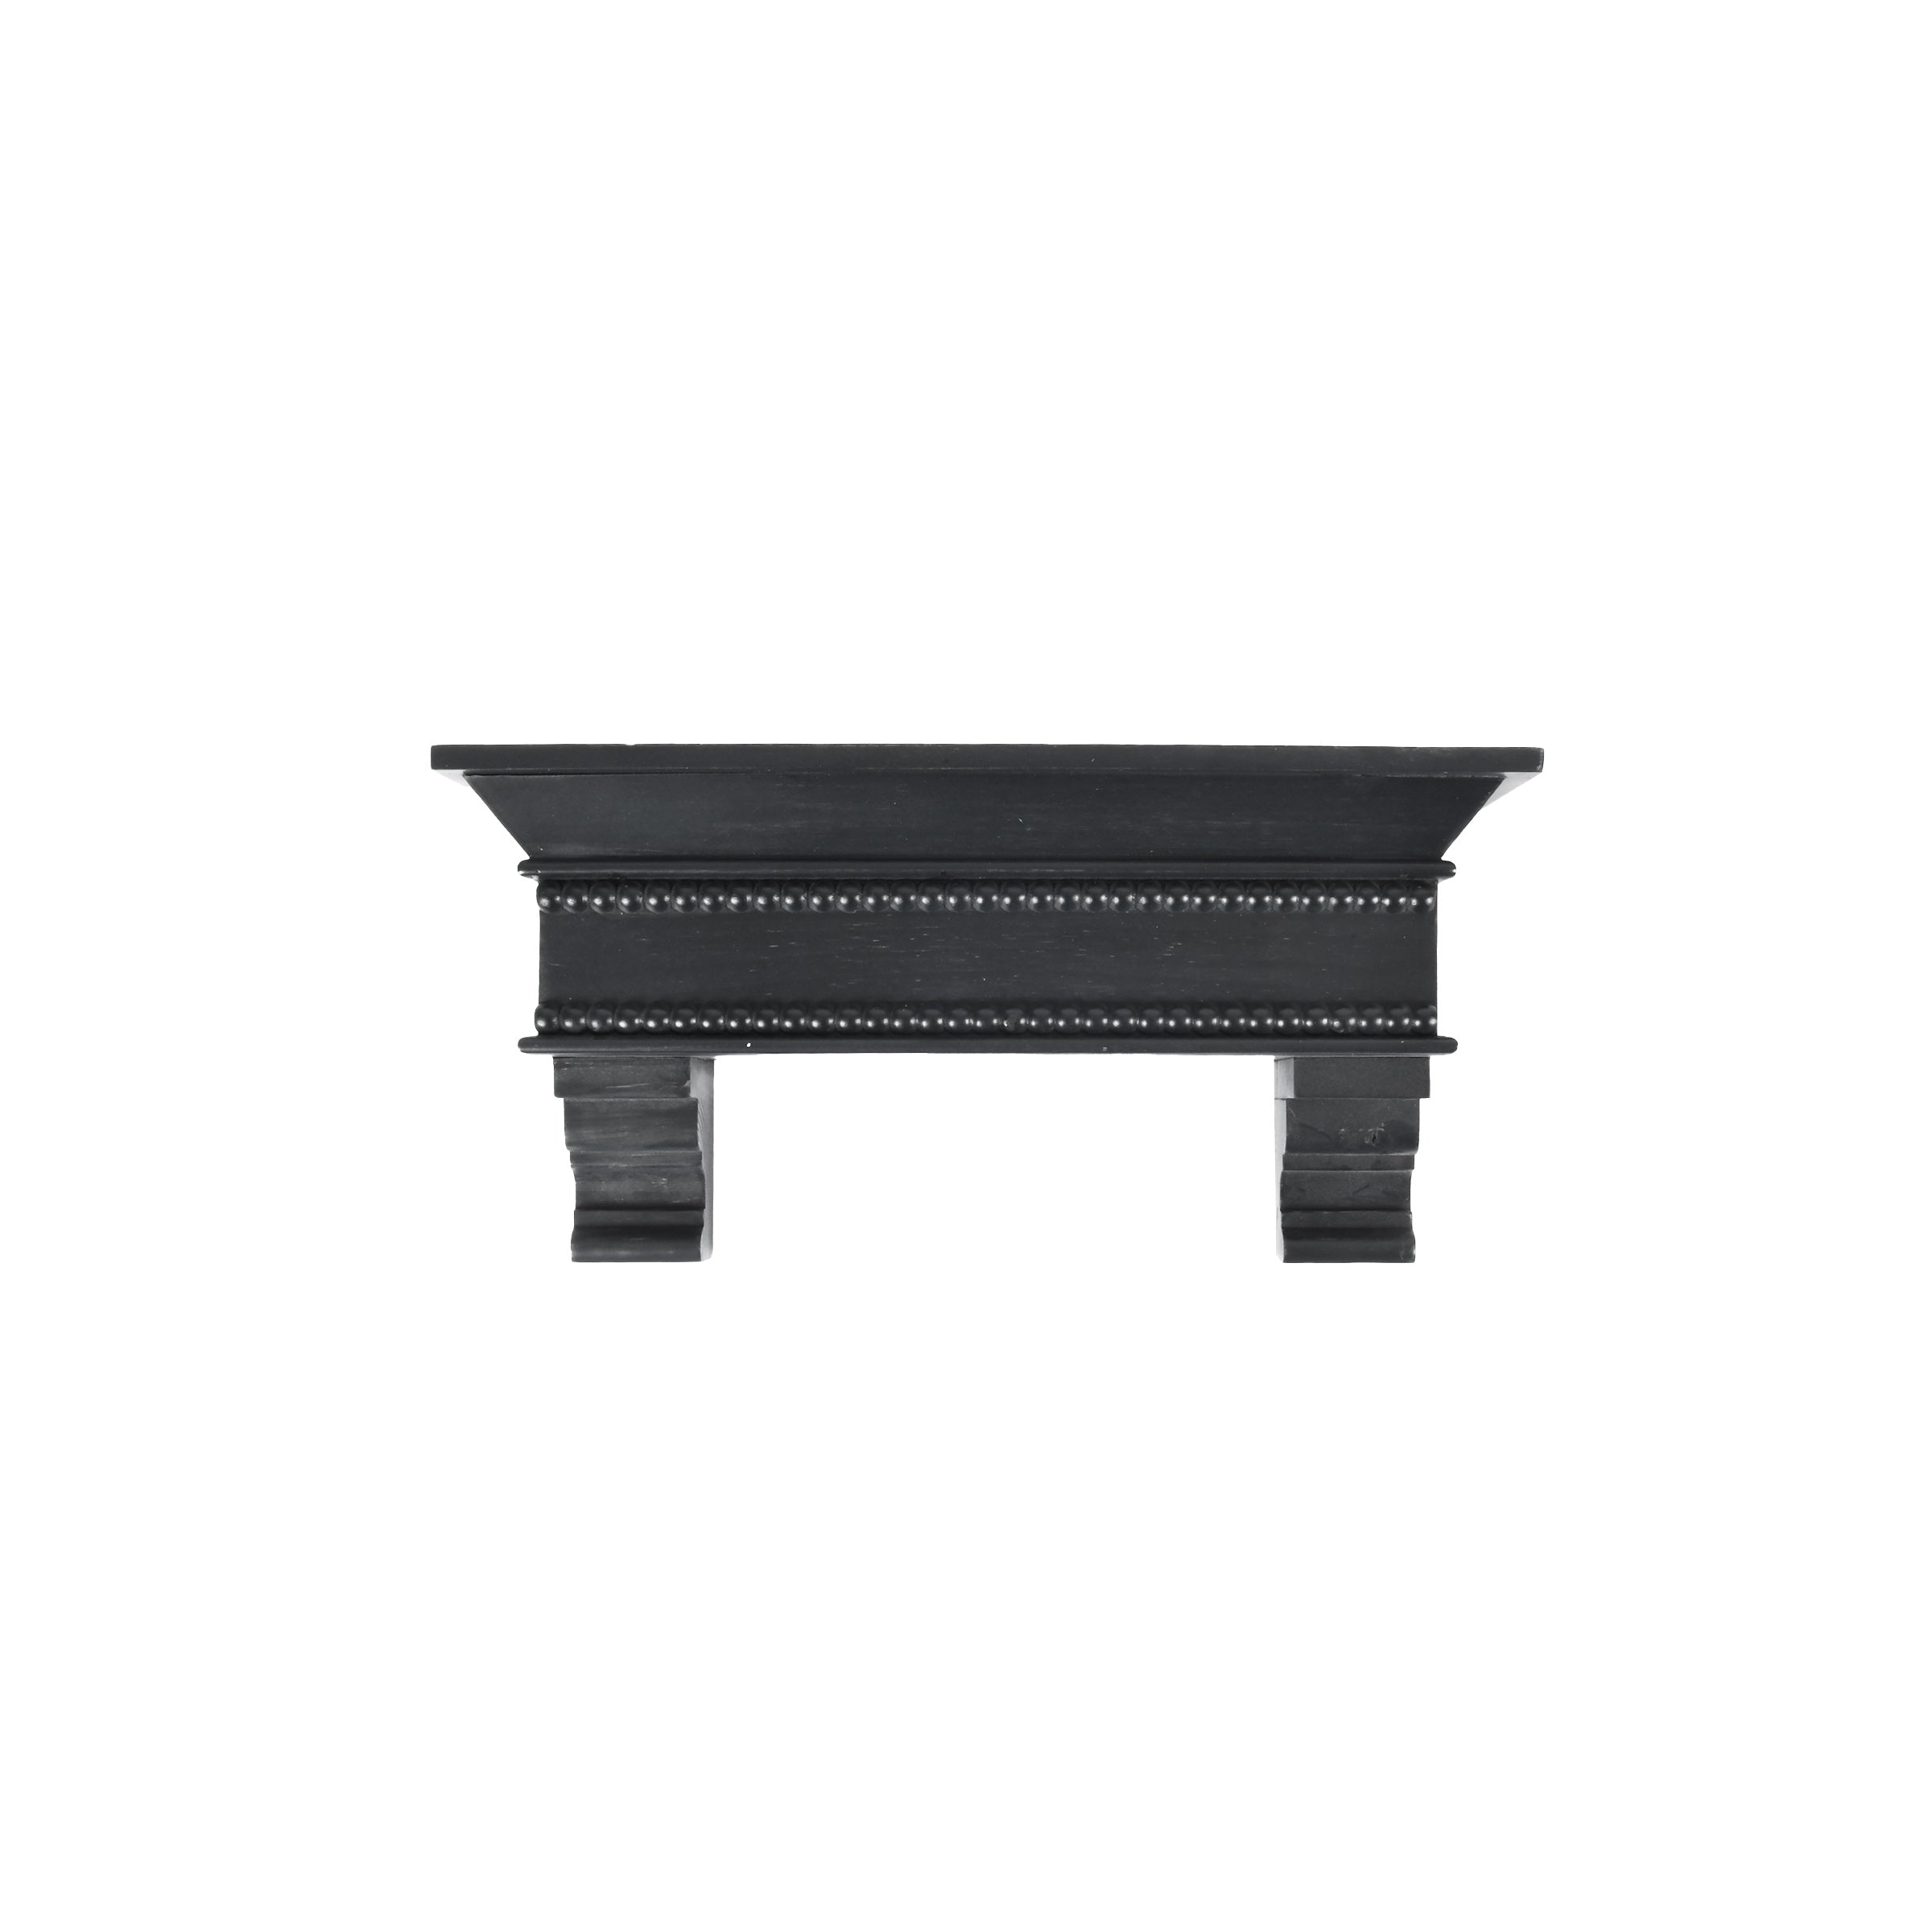 Rustic Wood Beaded 15" Floating Wall Shelf with Corbels, Black